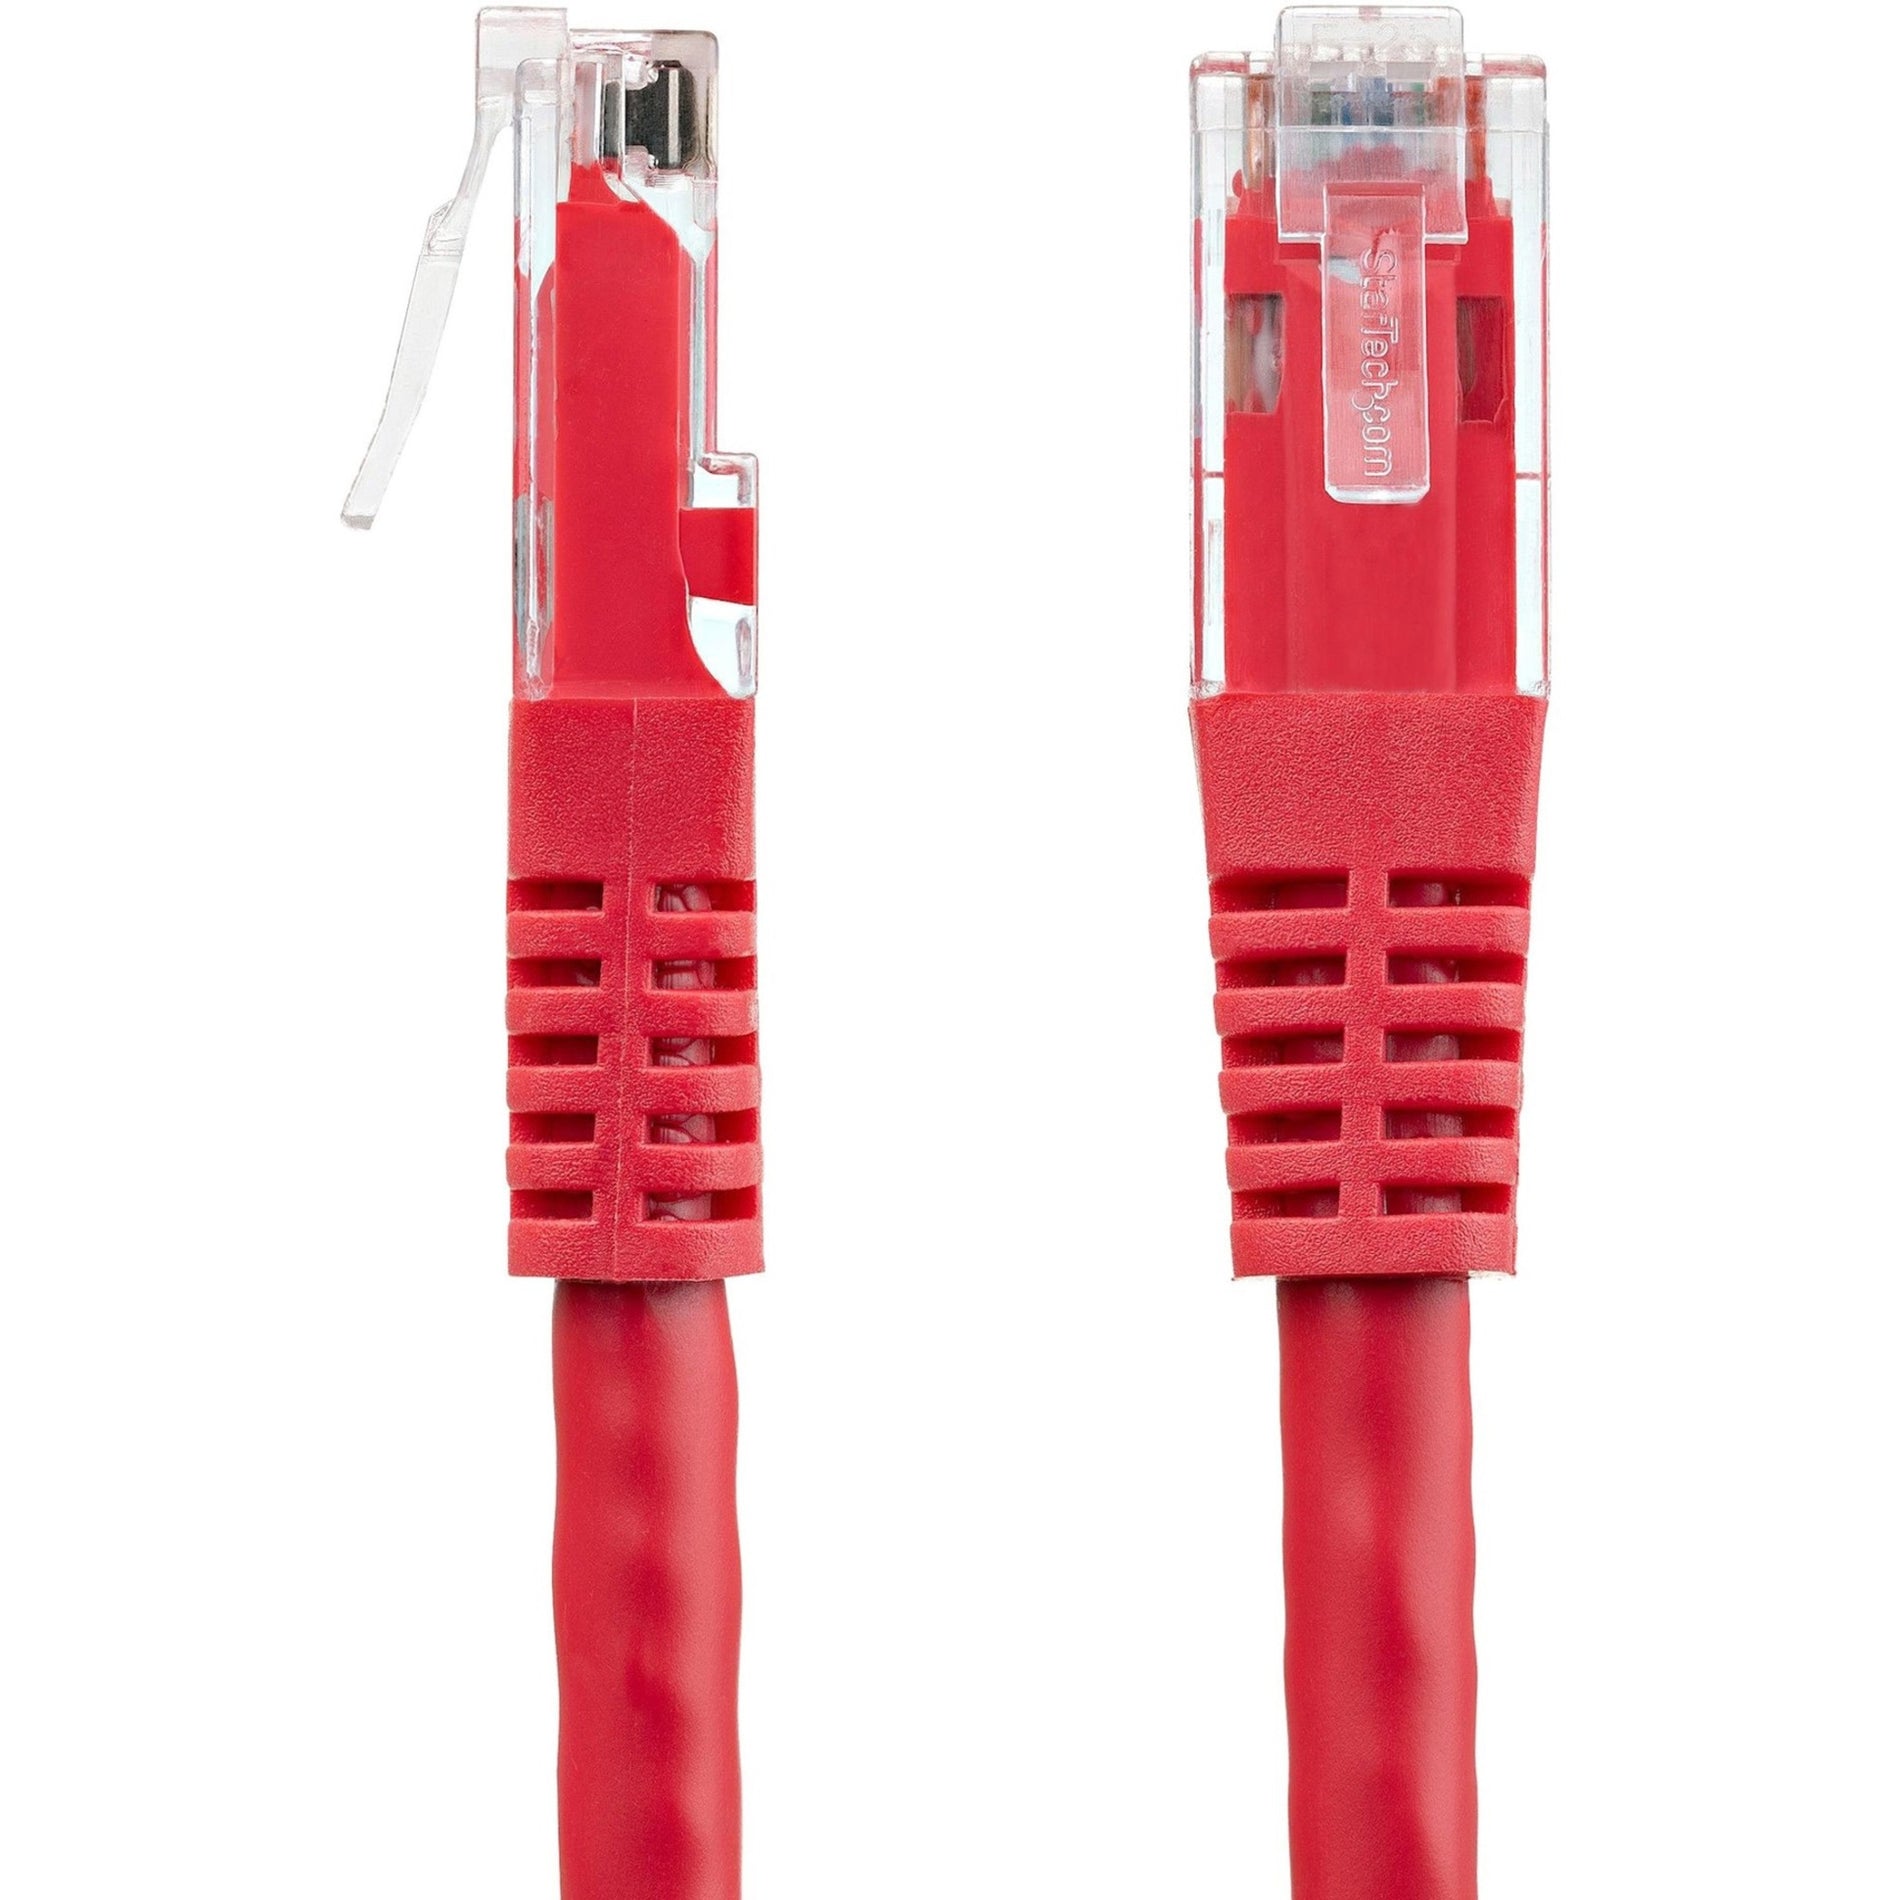 StarTech.com C6PATCH2RD 2ft Red Cat6 UTP Patch Cable ETL Verified, 10 Gbit/s, Gold Plated Connectors, Snagless Boot